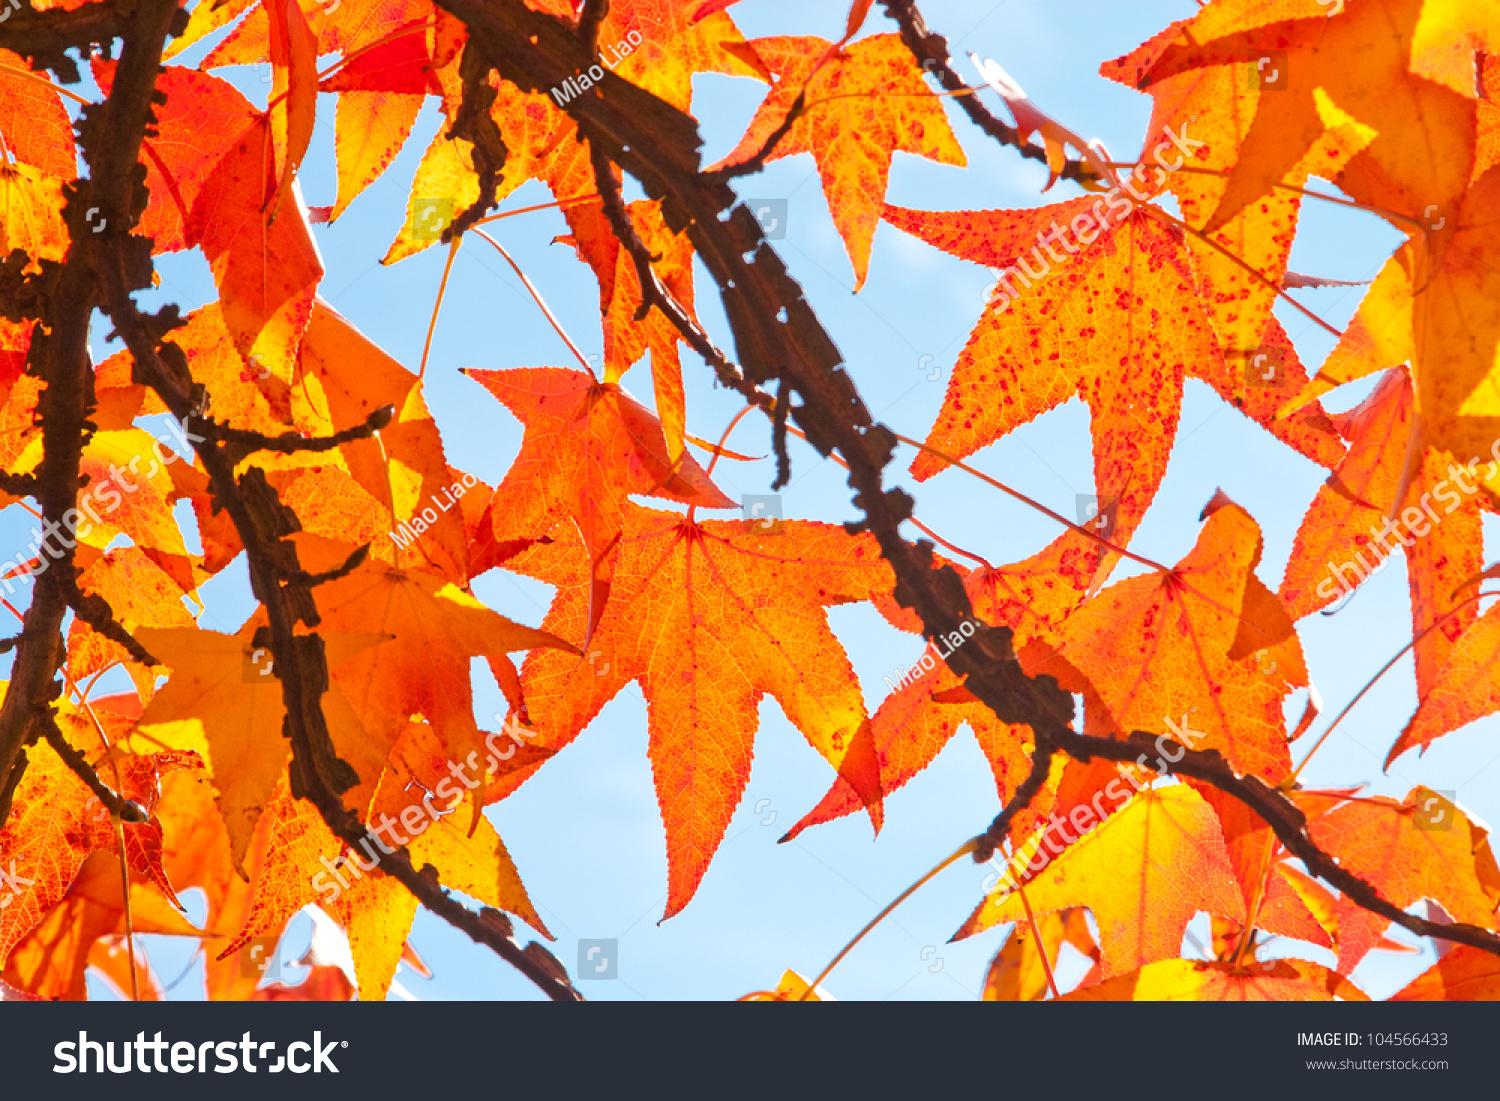 Fall Trees Leaves Stock Photo 104566433 - Shutterstock